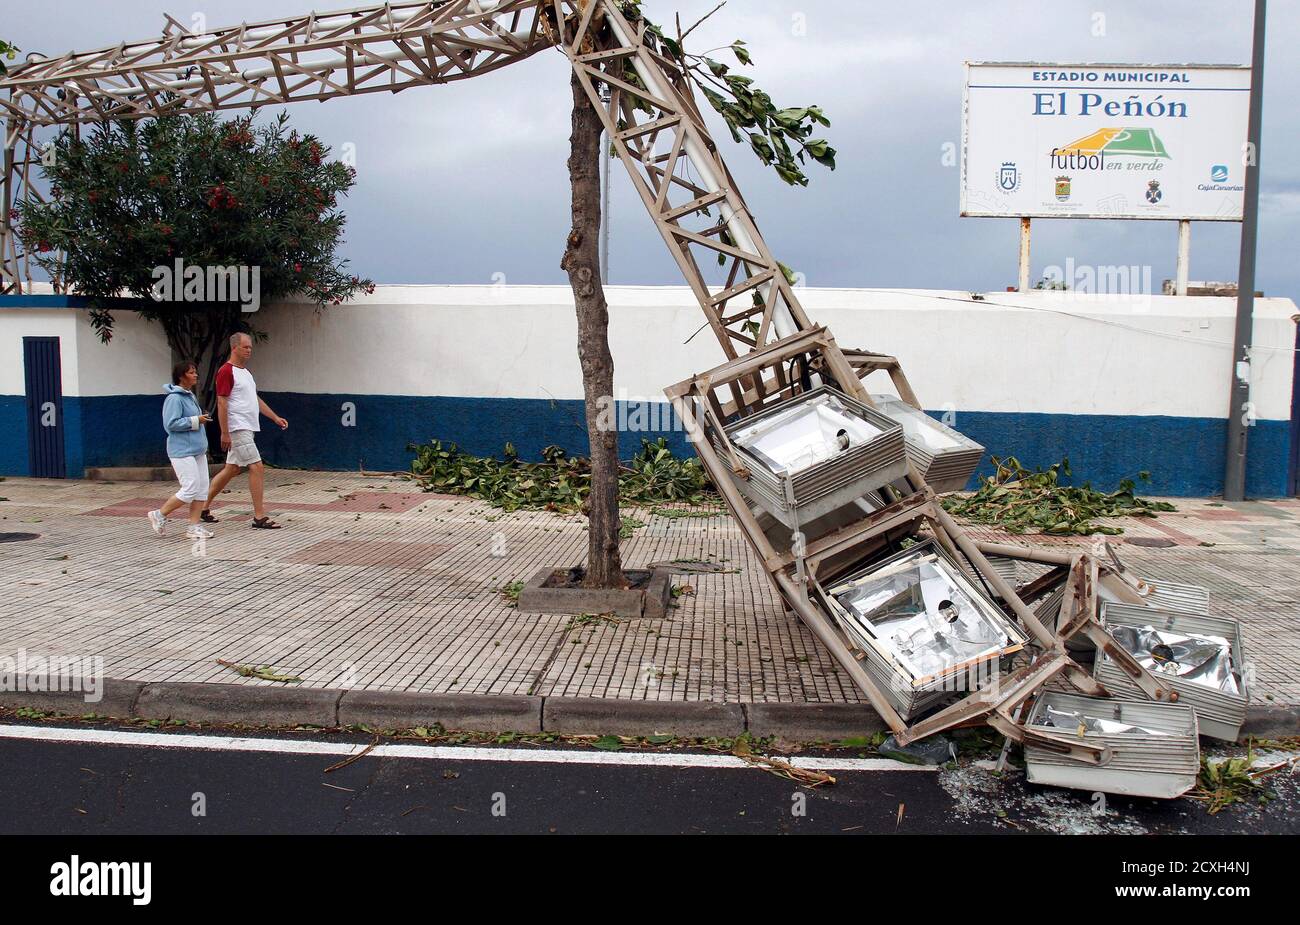 A section of lights from a municipal stadium which were blown down by high  winds hangs over the pavement in Puerto de la Cruz in Tenerife, in Spain's  Canary Islands November 29,